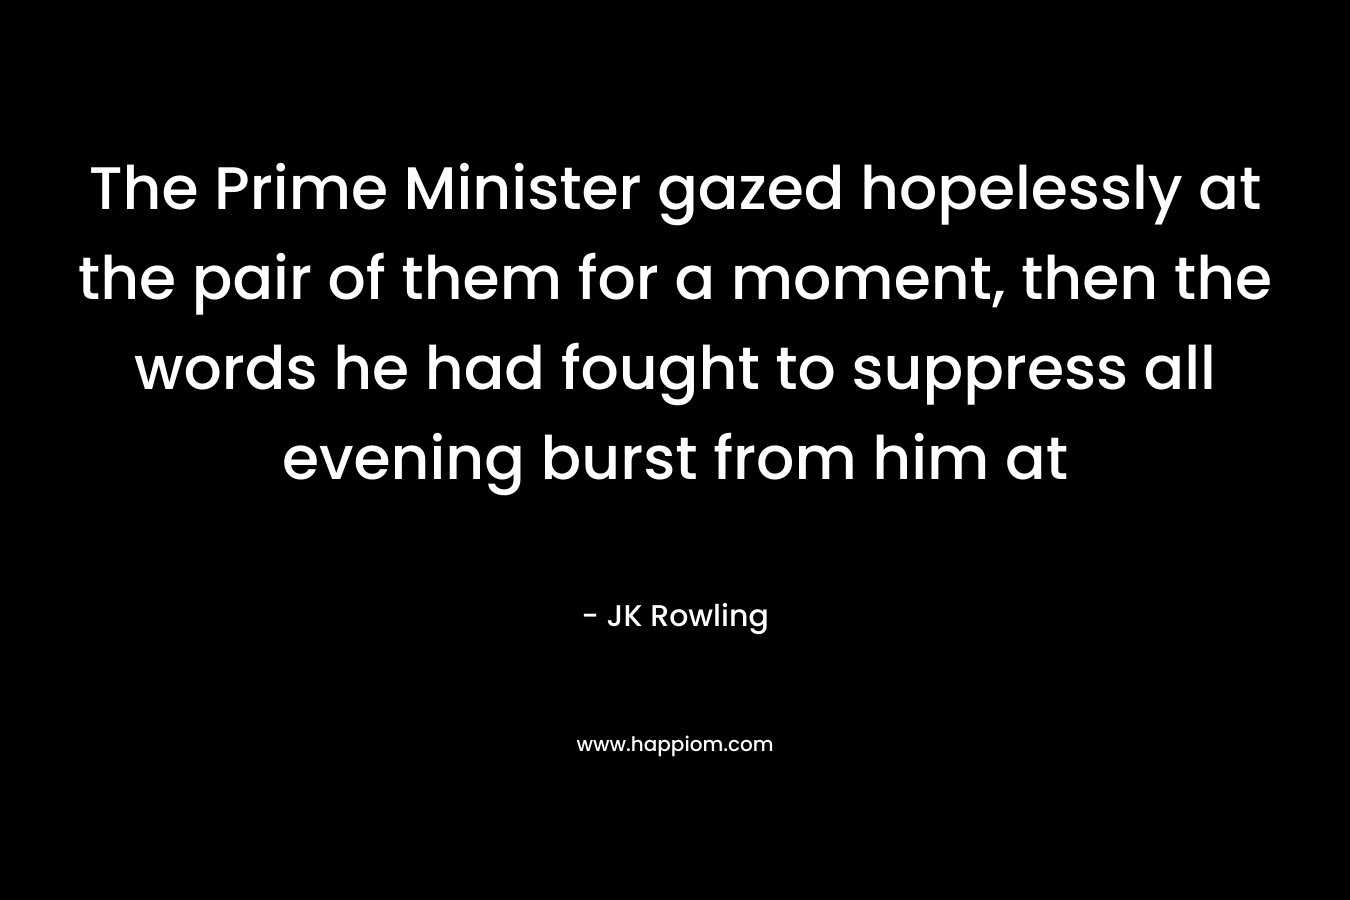 The Prime Minister gazed hopelessly at the pair of them for a moment, then the words he had fought to suppress all evening burst from him at